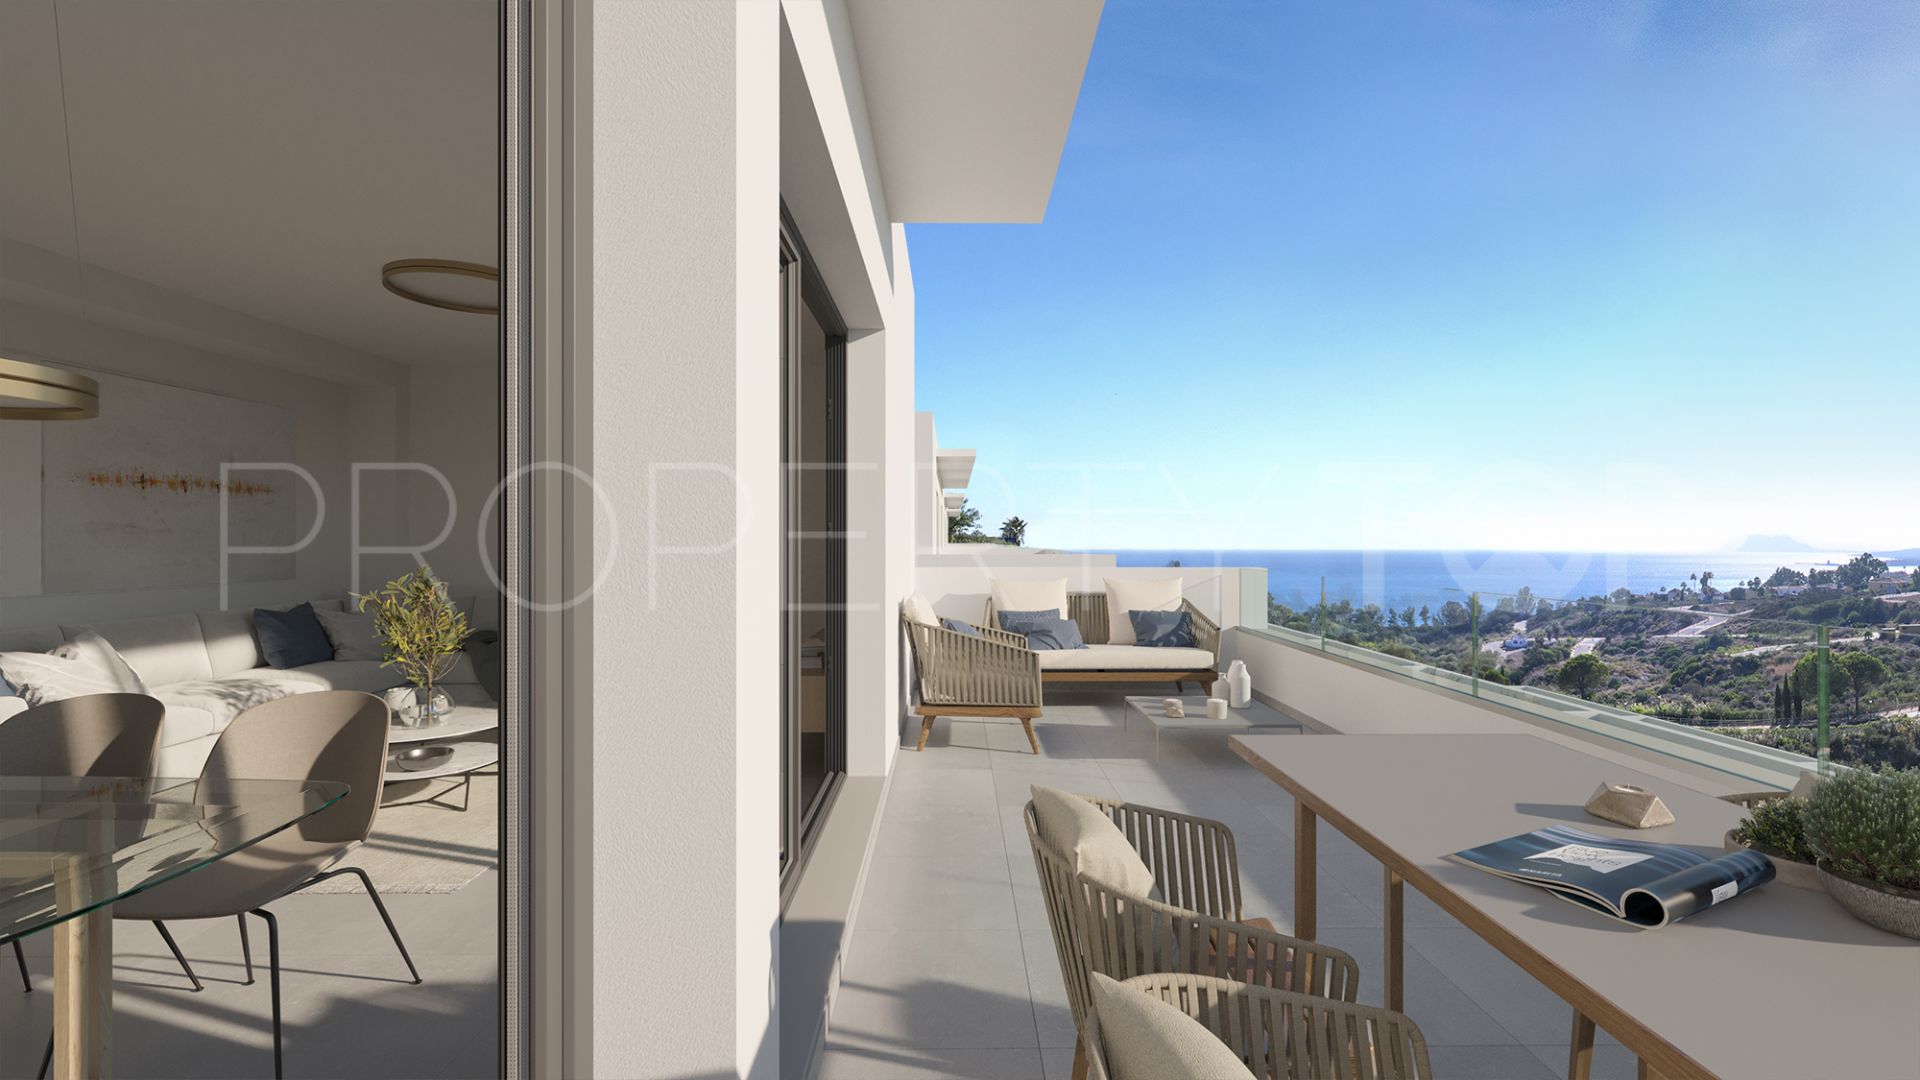 For sale town house in Manilva with 3 bedrooms